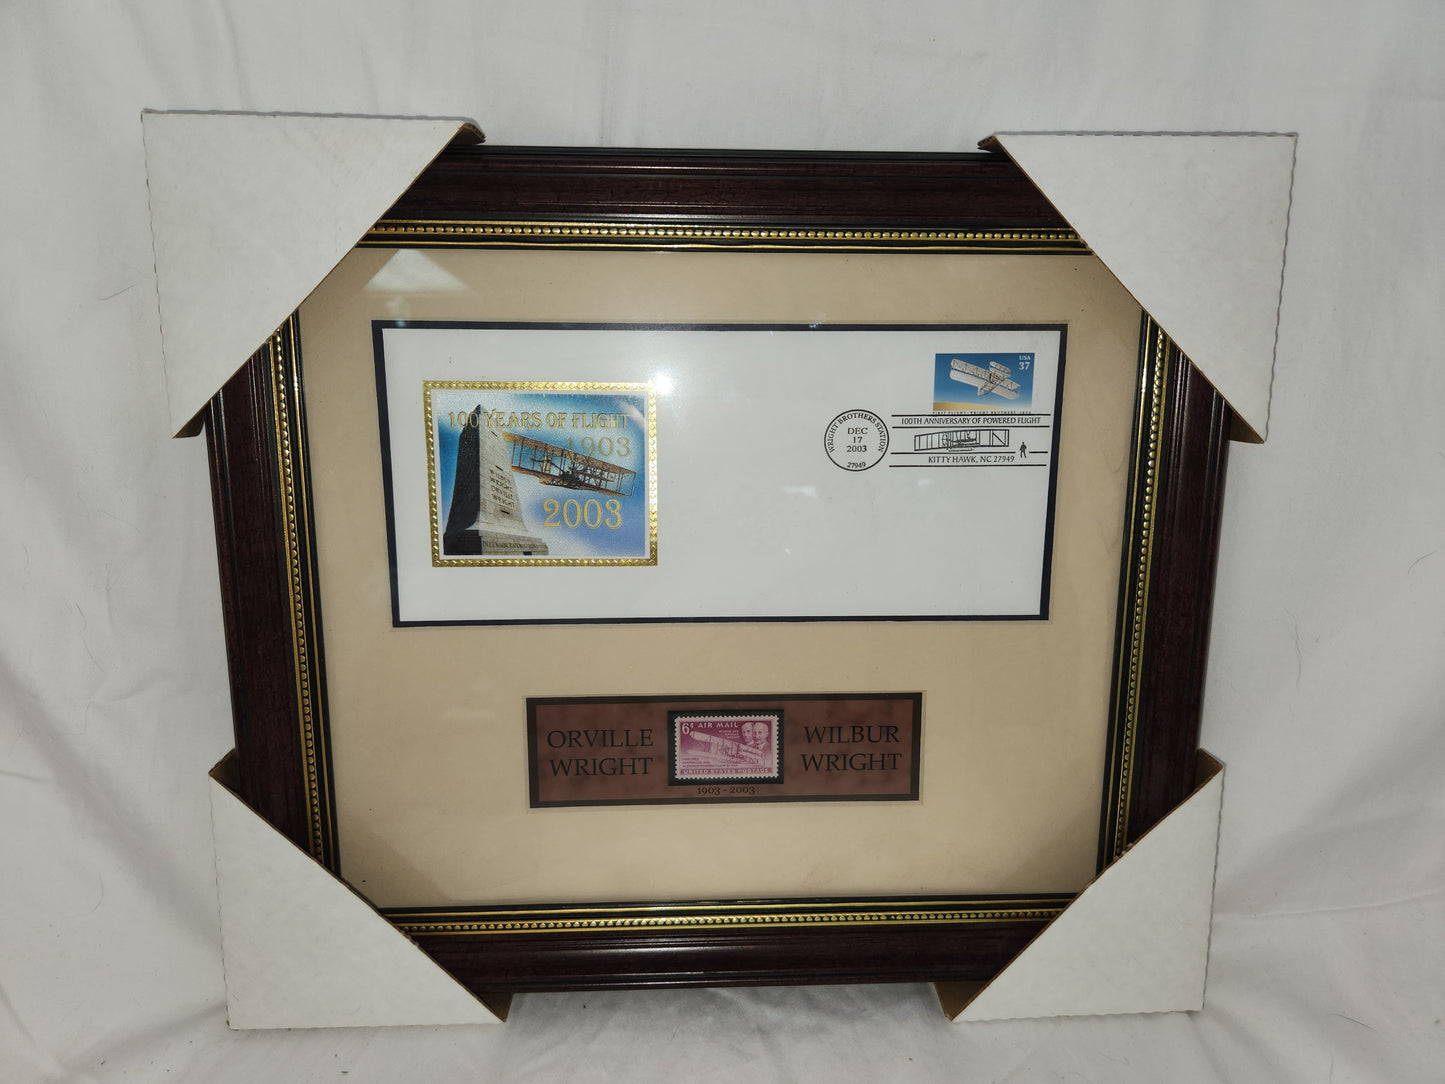 Wright Brothers Framed 100th Anniversary Envelope w/ Stamp & 6 Cent Airmail Stamp